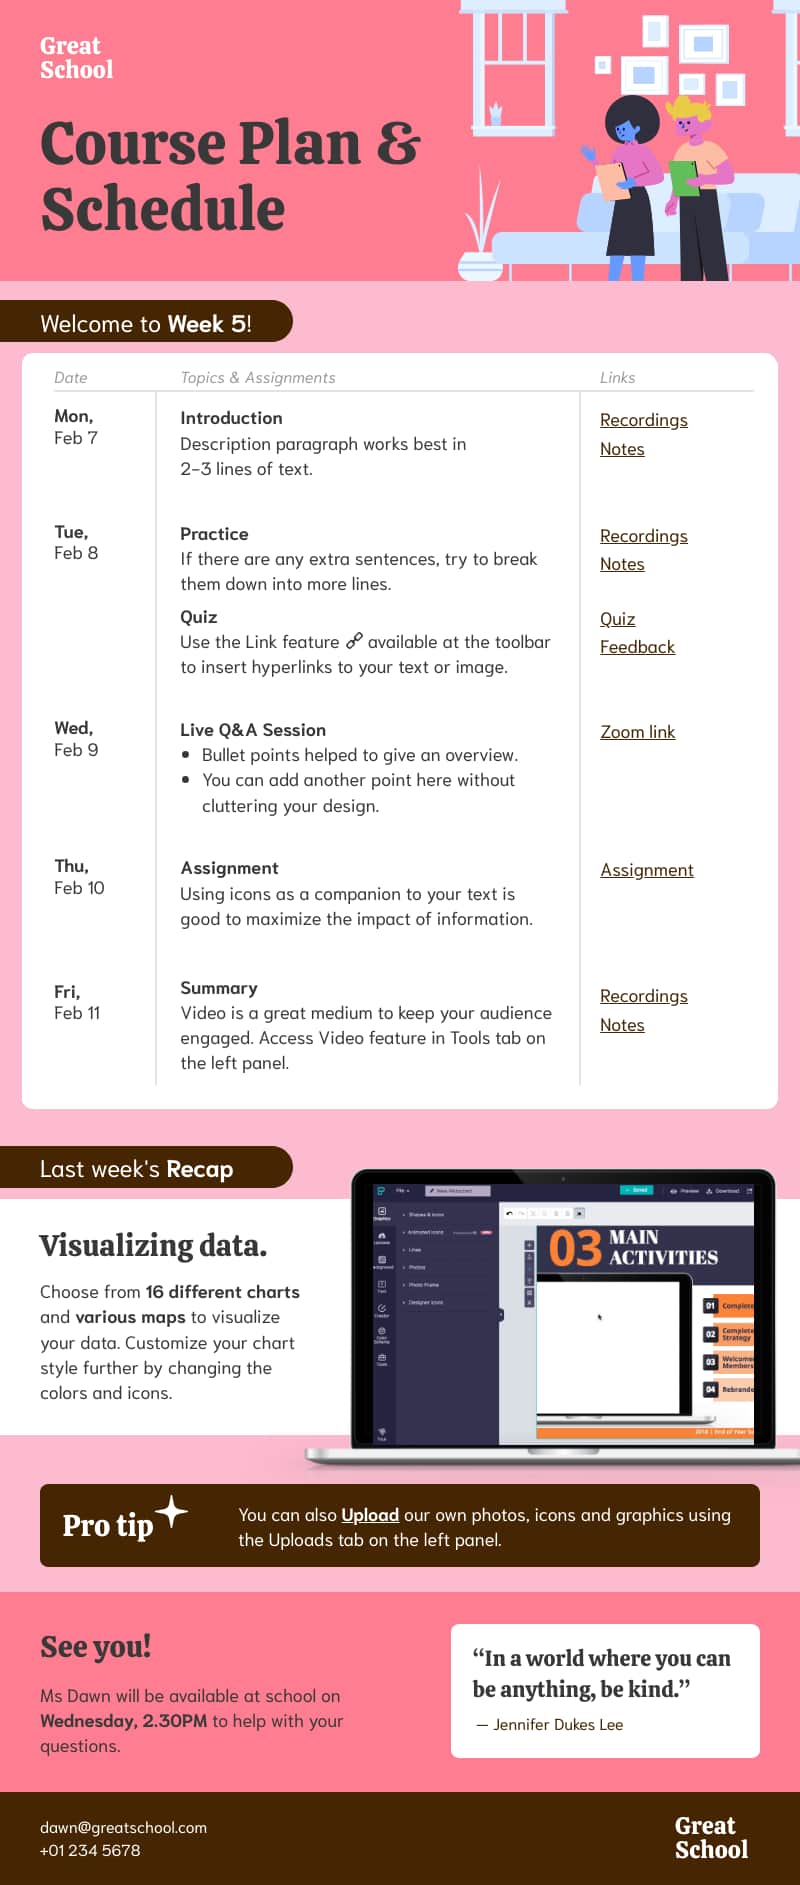 course plan and schedule infographic template